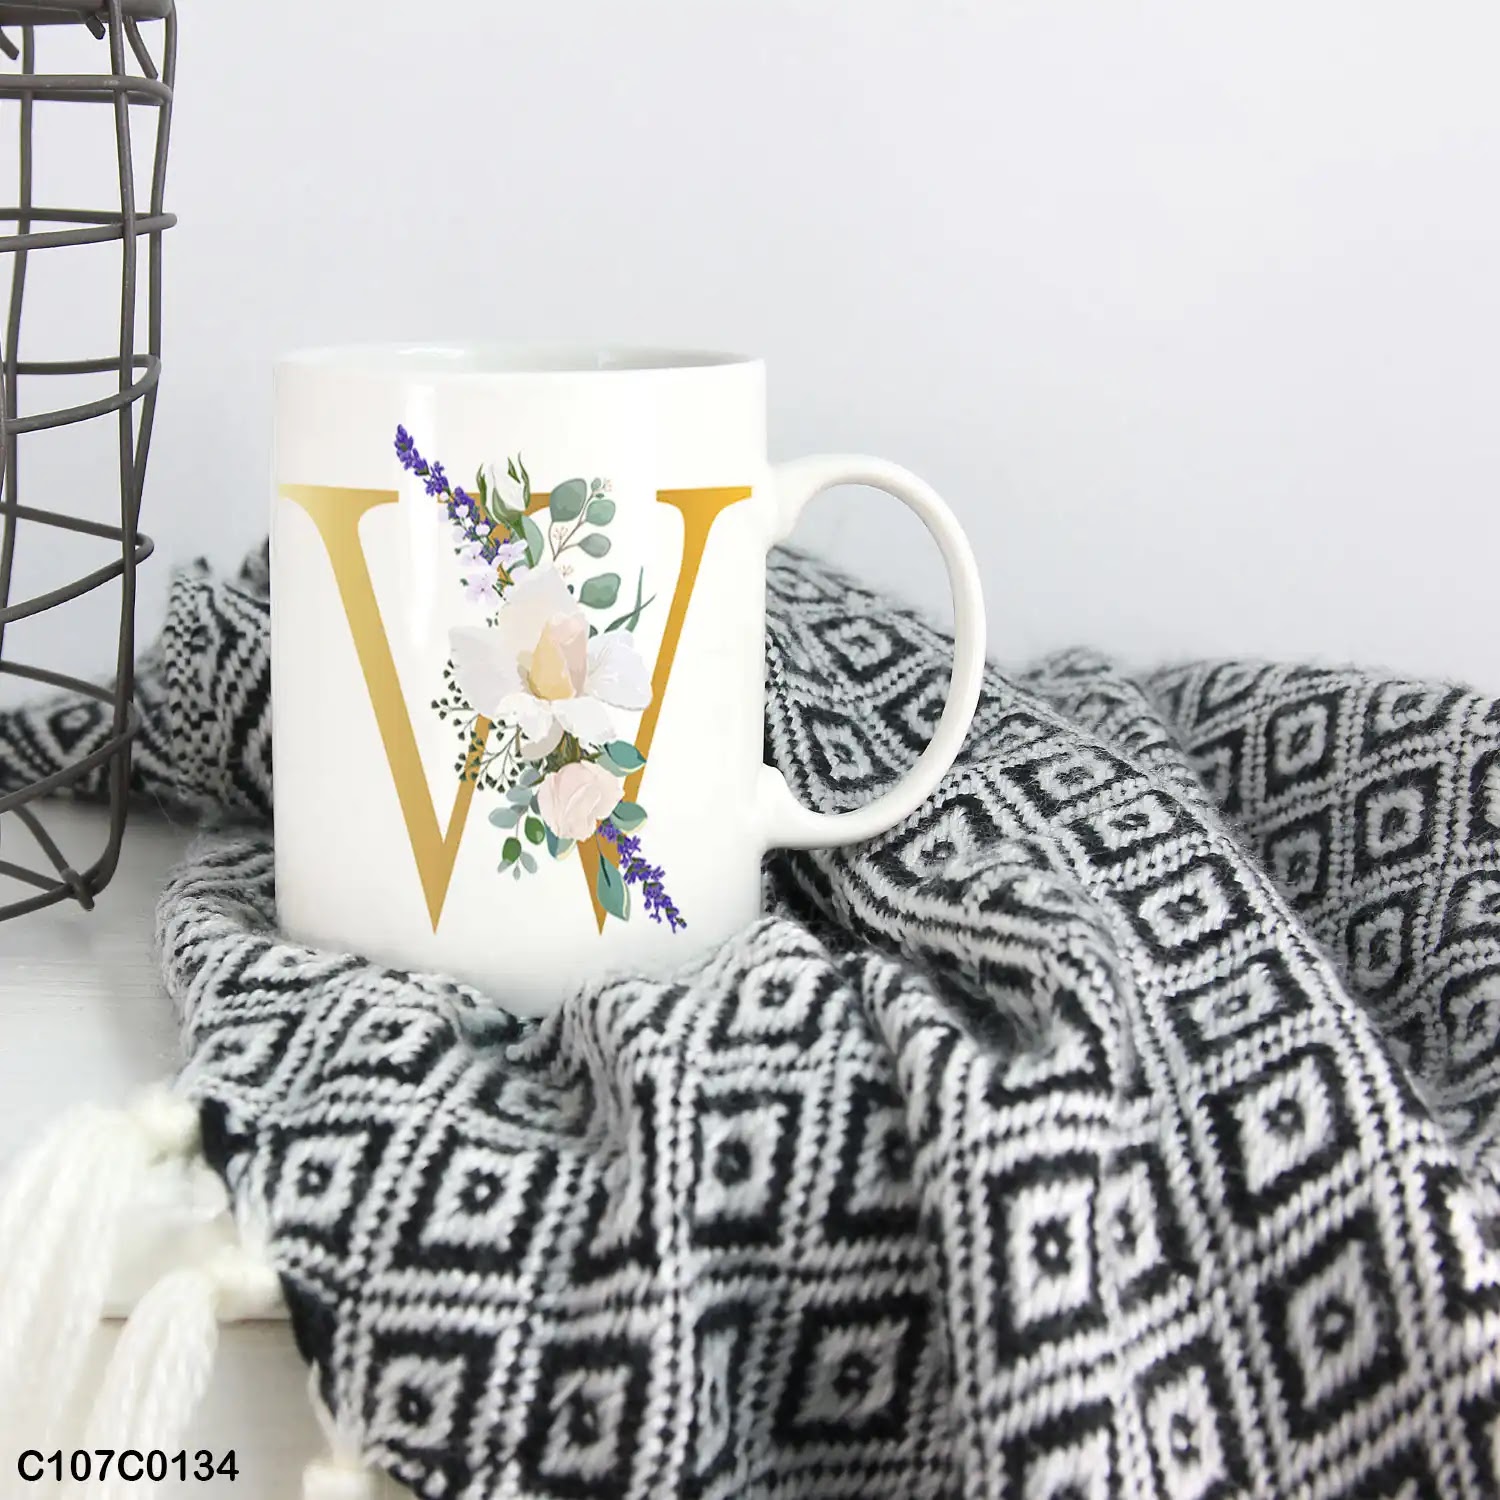 A white mug (cup) printed with gold Letter "W" and small white branch